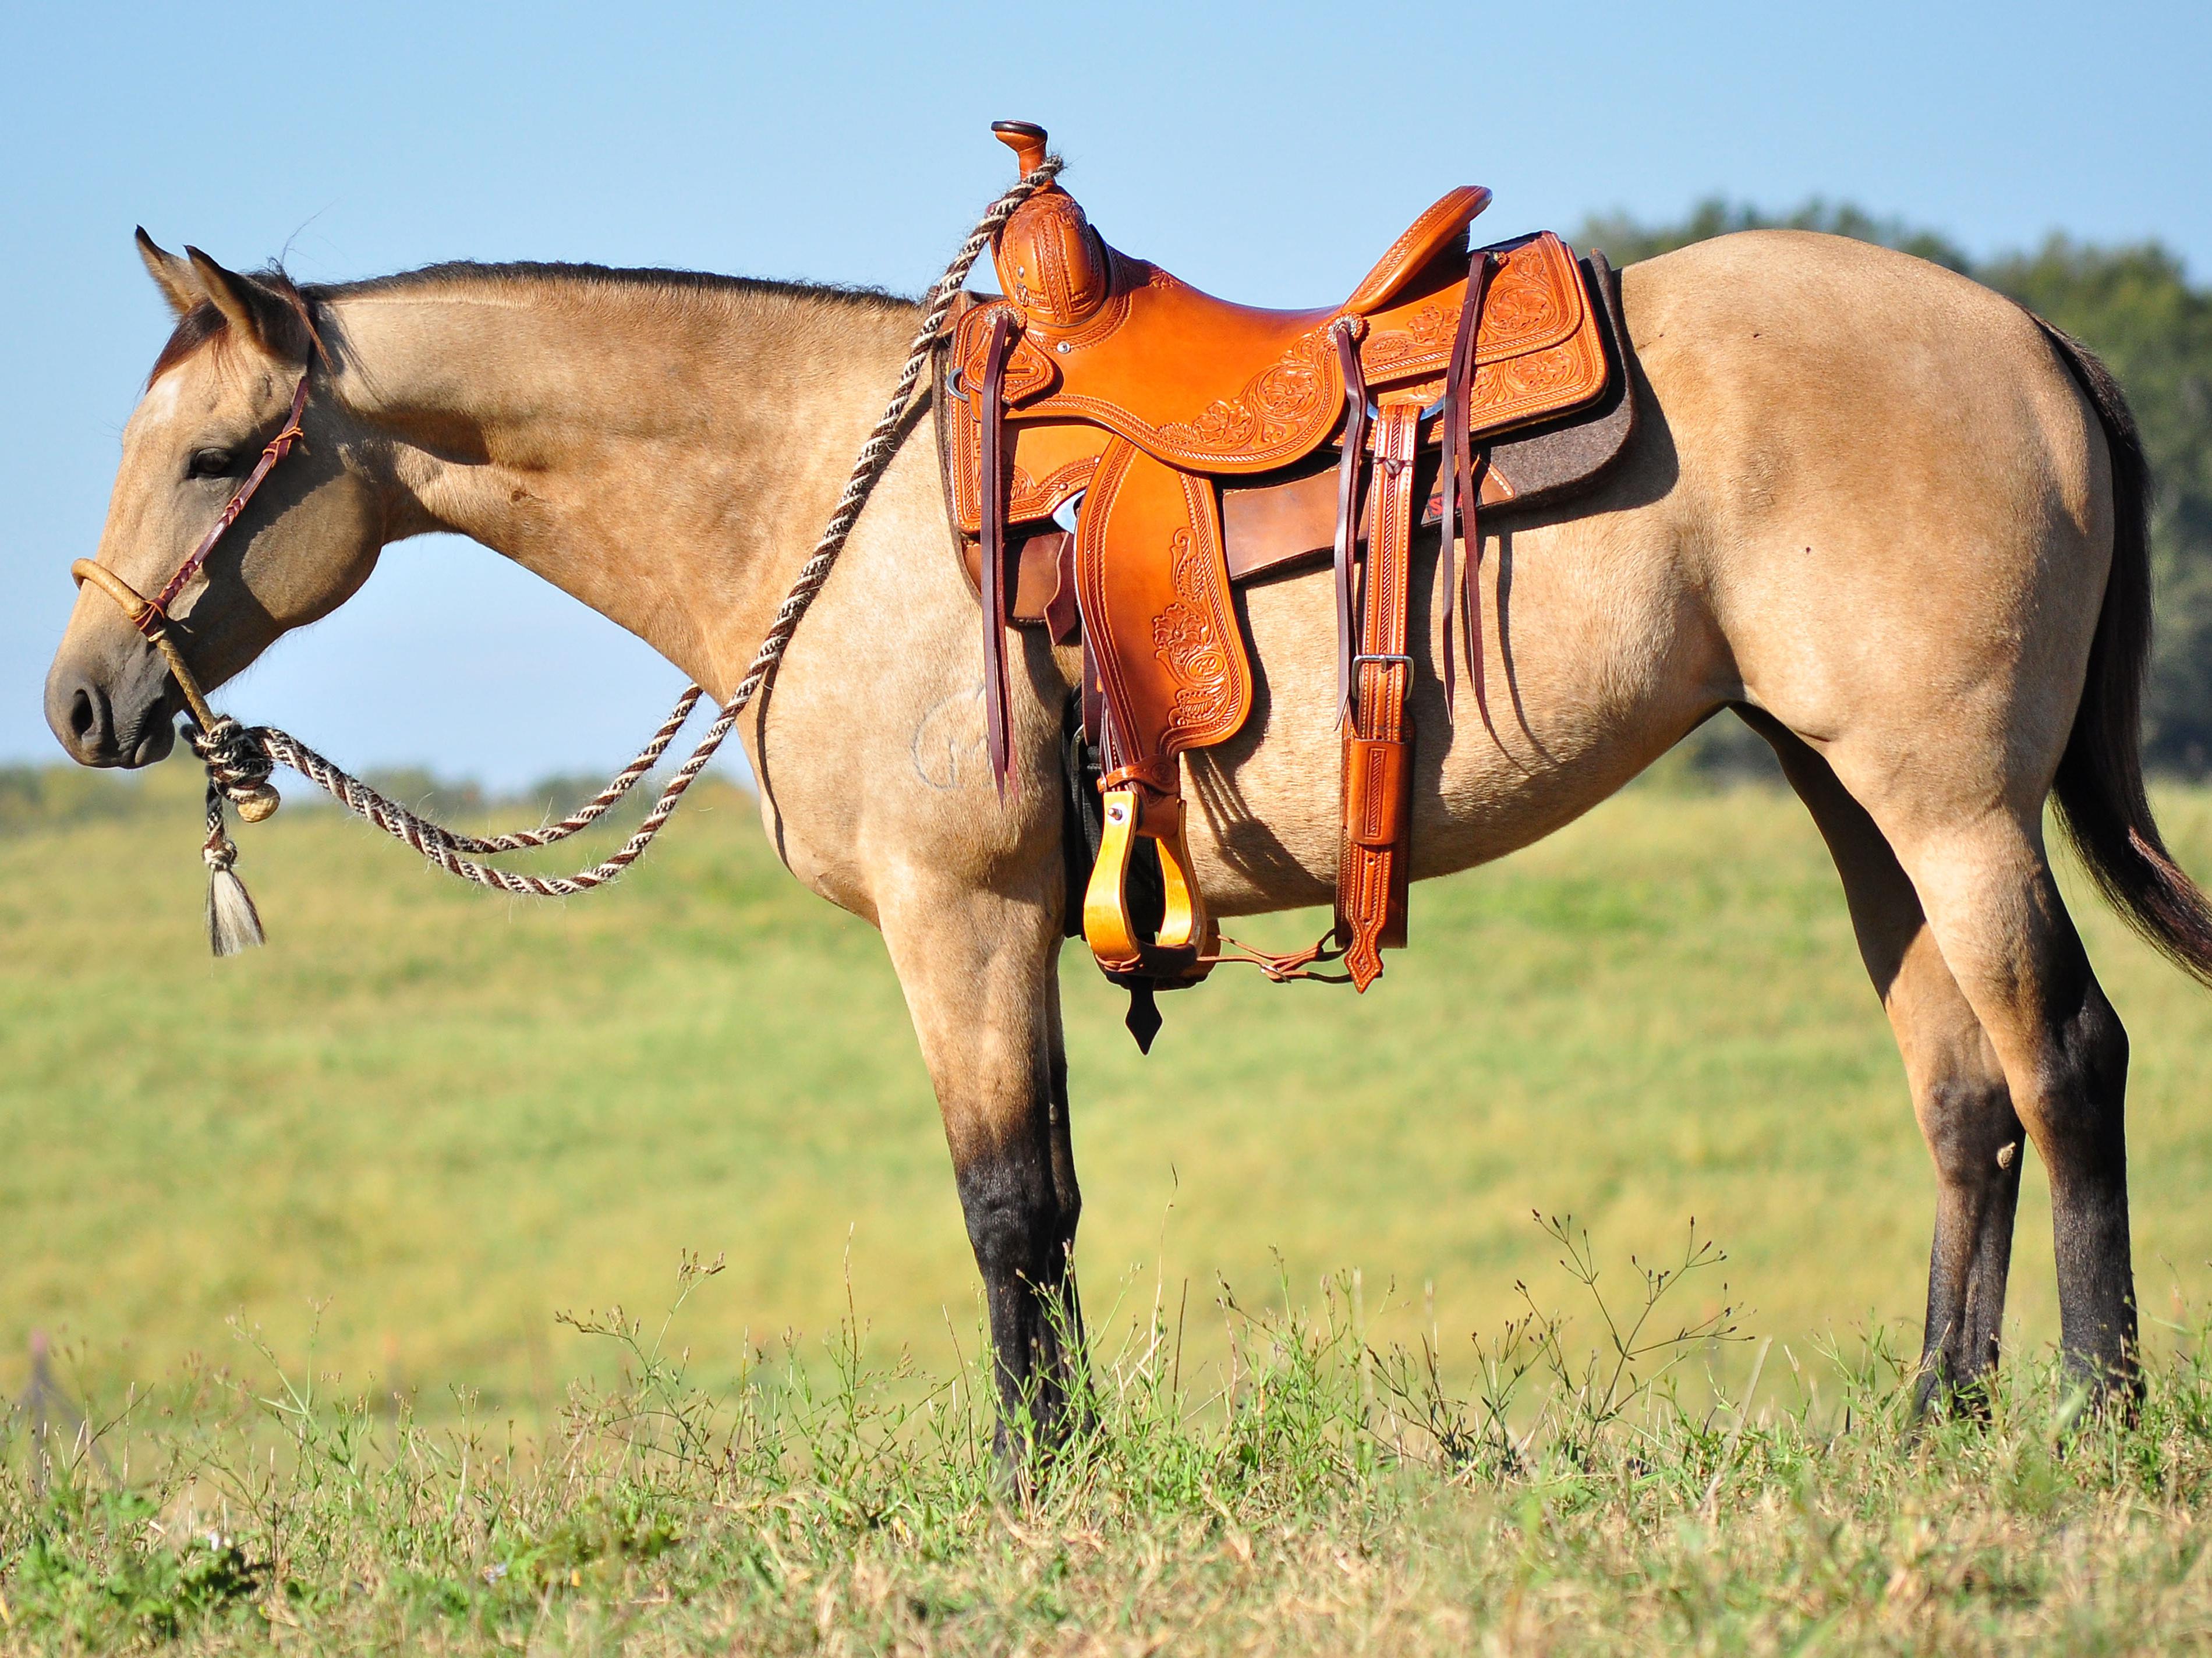 MSU Merlins Pizazz, otherwise known as “Daisy,” is a beautiful, 2-year-old buckskin mare and one of 17 horses available for purchase through the annual online Mississippi State University horse auction. (Photo by MSU College of Agriculture and Life Sciences/Elizabeth Caldwell)